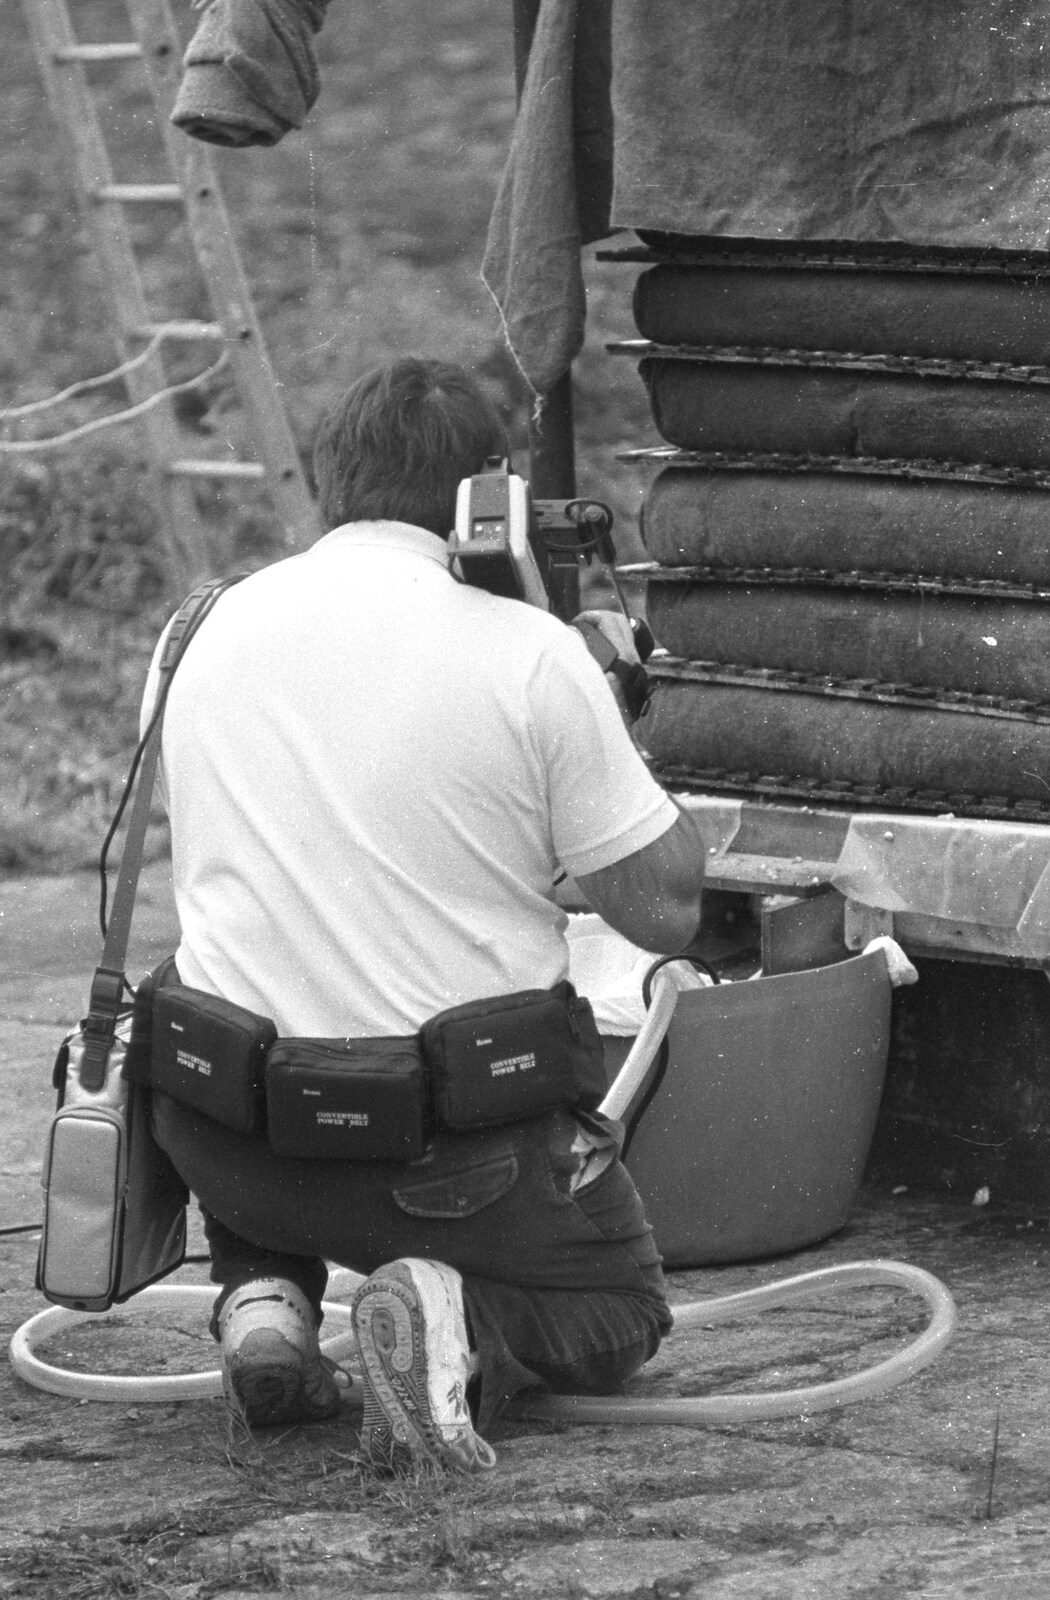 David Cork gets some close-up video from Cider Making in Black and White, Stuston, Suffolk - 11th October 1992